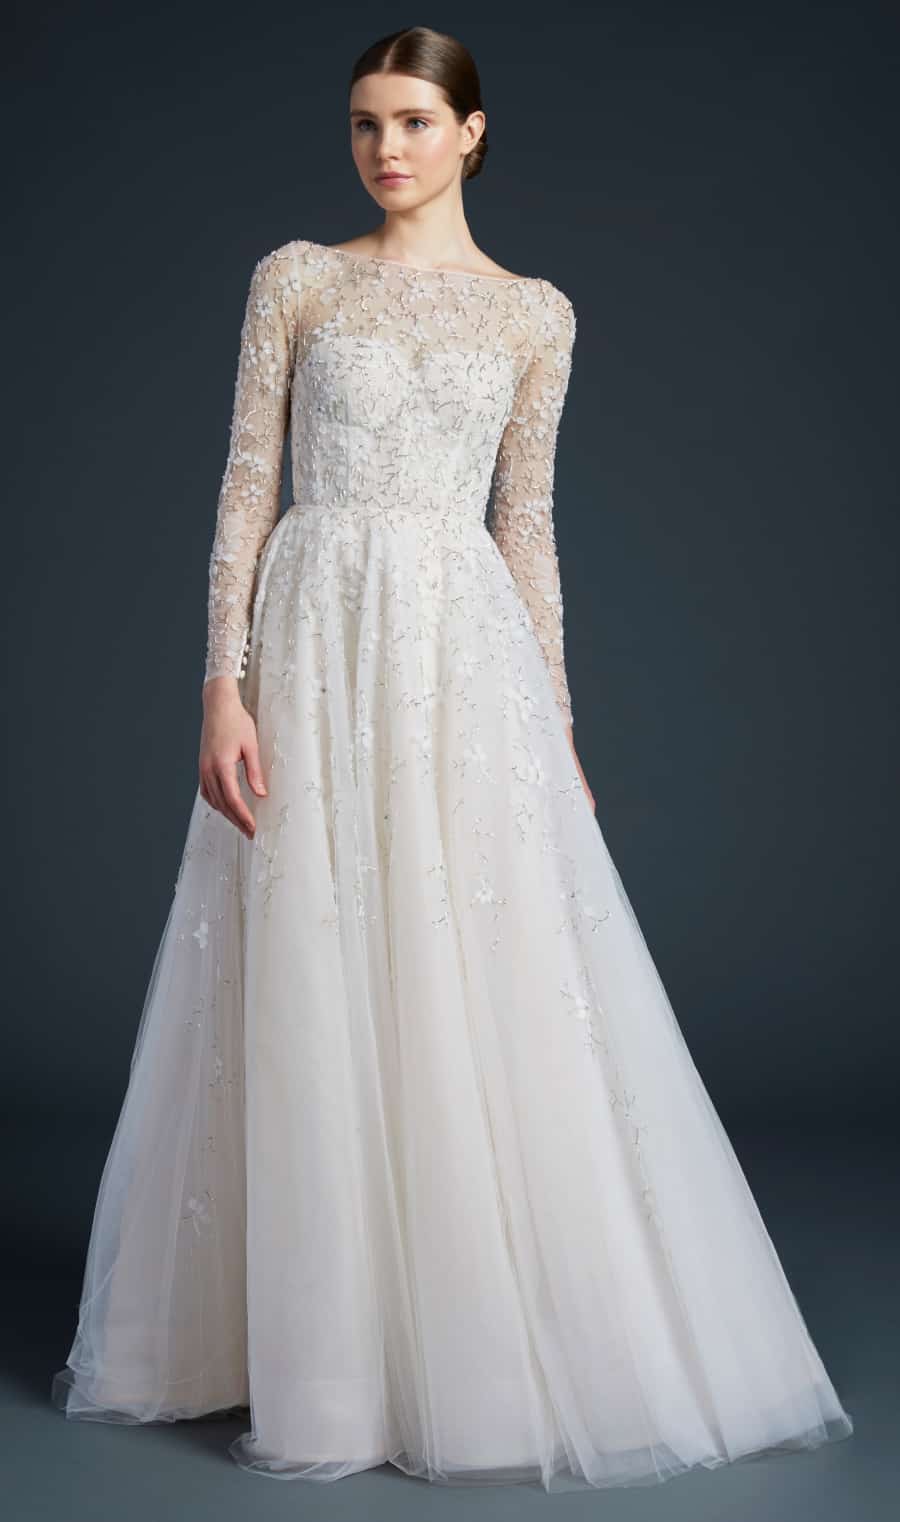 Anne Barge Wedding Dresses Fall 2019 - Dress for the Wedding